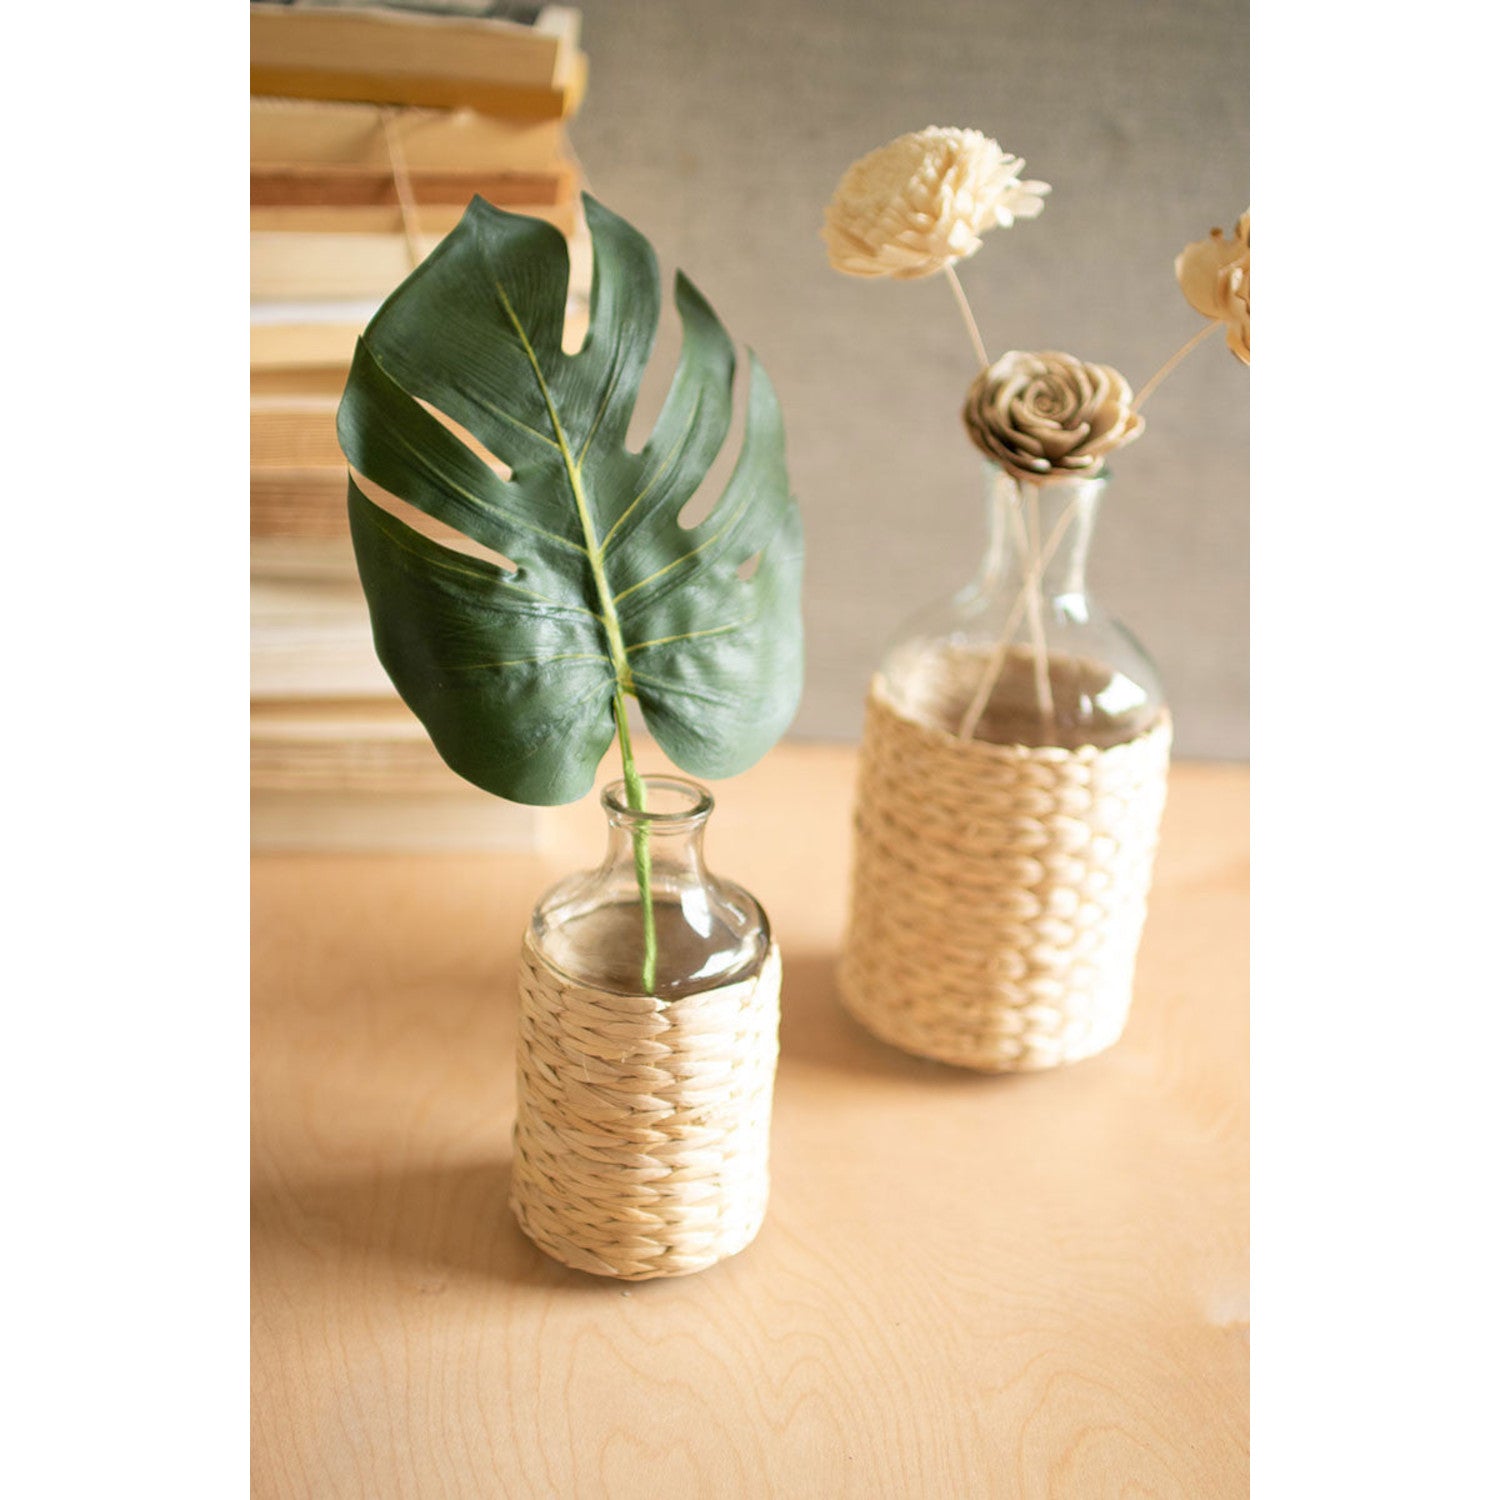 Seagrass Wrapped Vases, Sets of 2